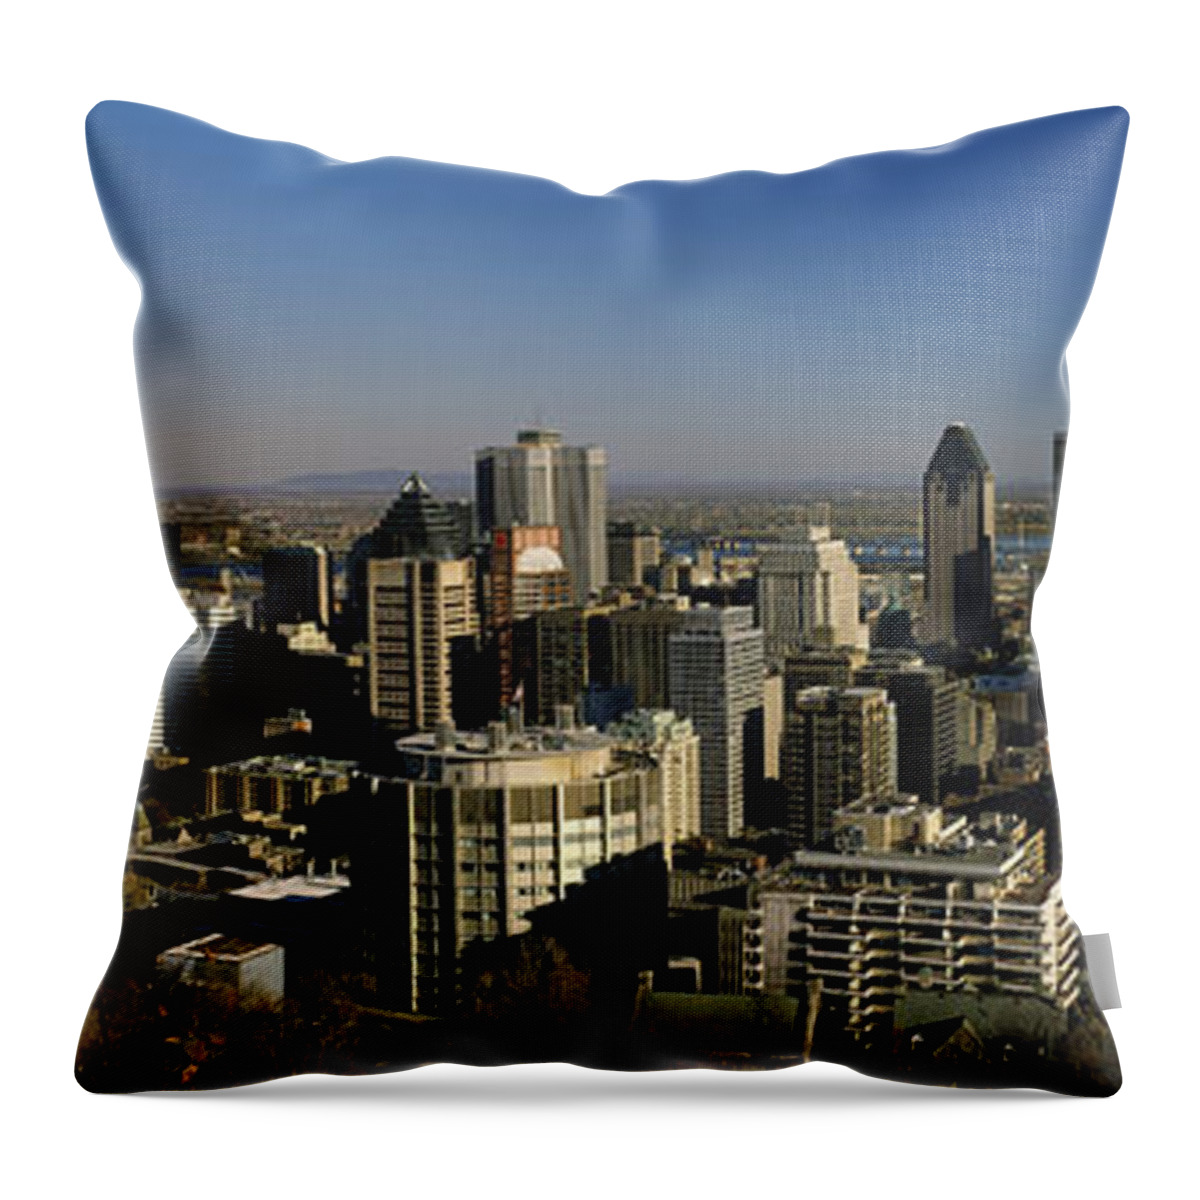 Photography Throw Pillow featuring the photograph Aerial View Of Skyscrapers In A City #1 by Panoramic Images